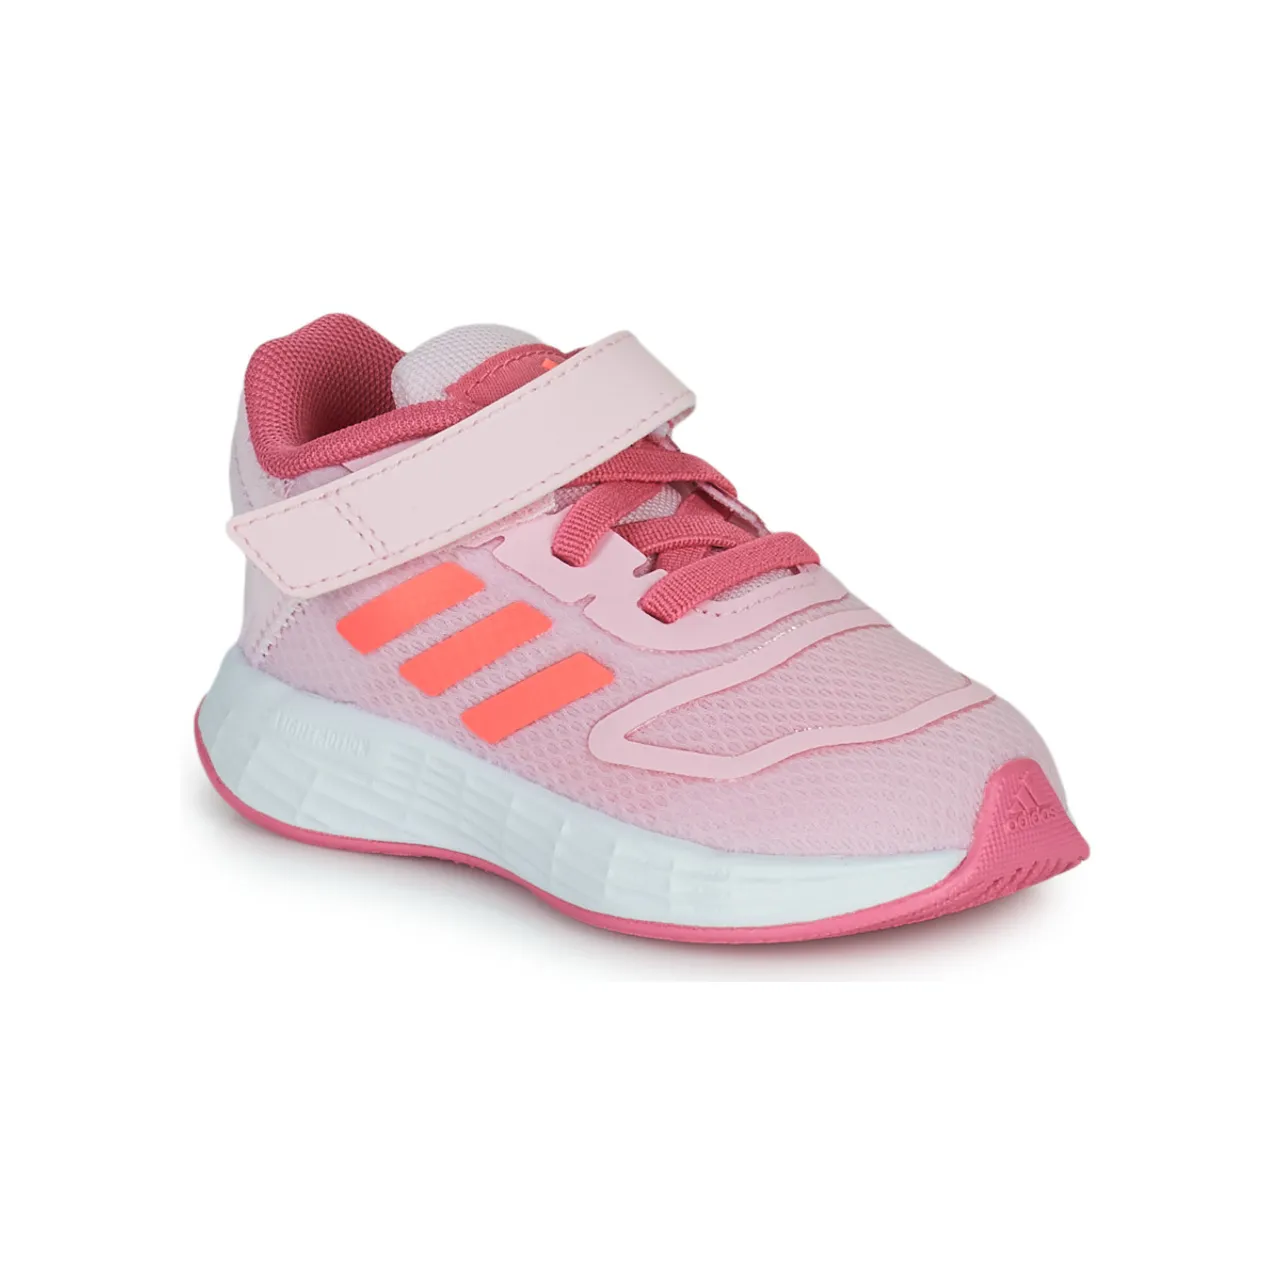 adidas  DURAMO 10 EL I  girls's Children's Shoes (Trainers) in Pink